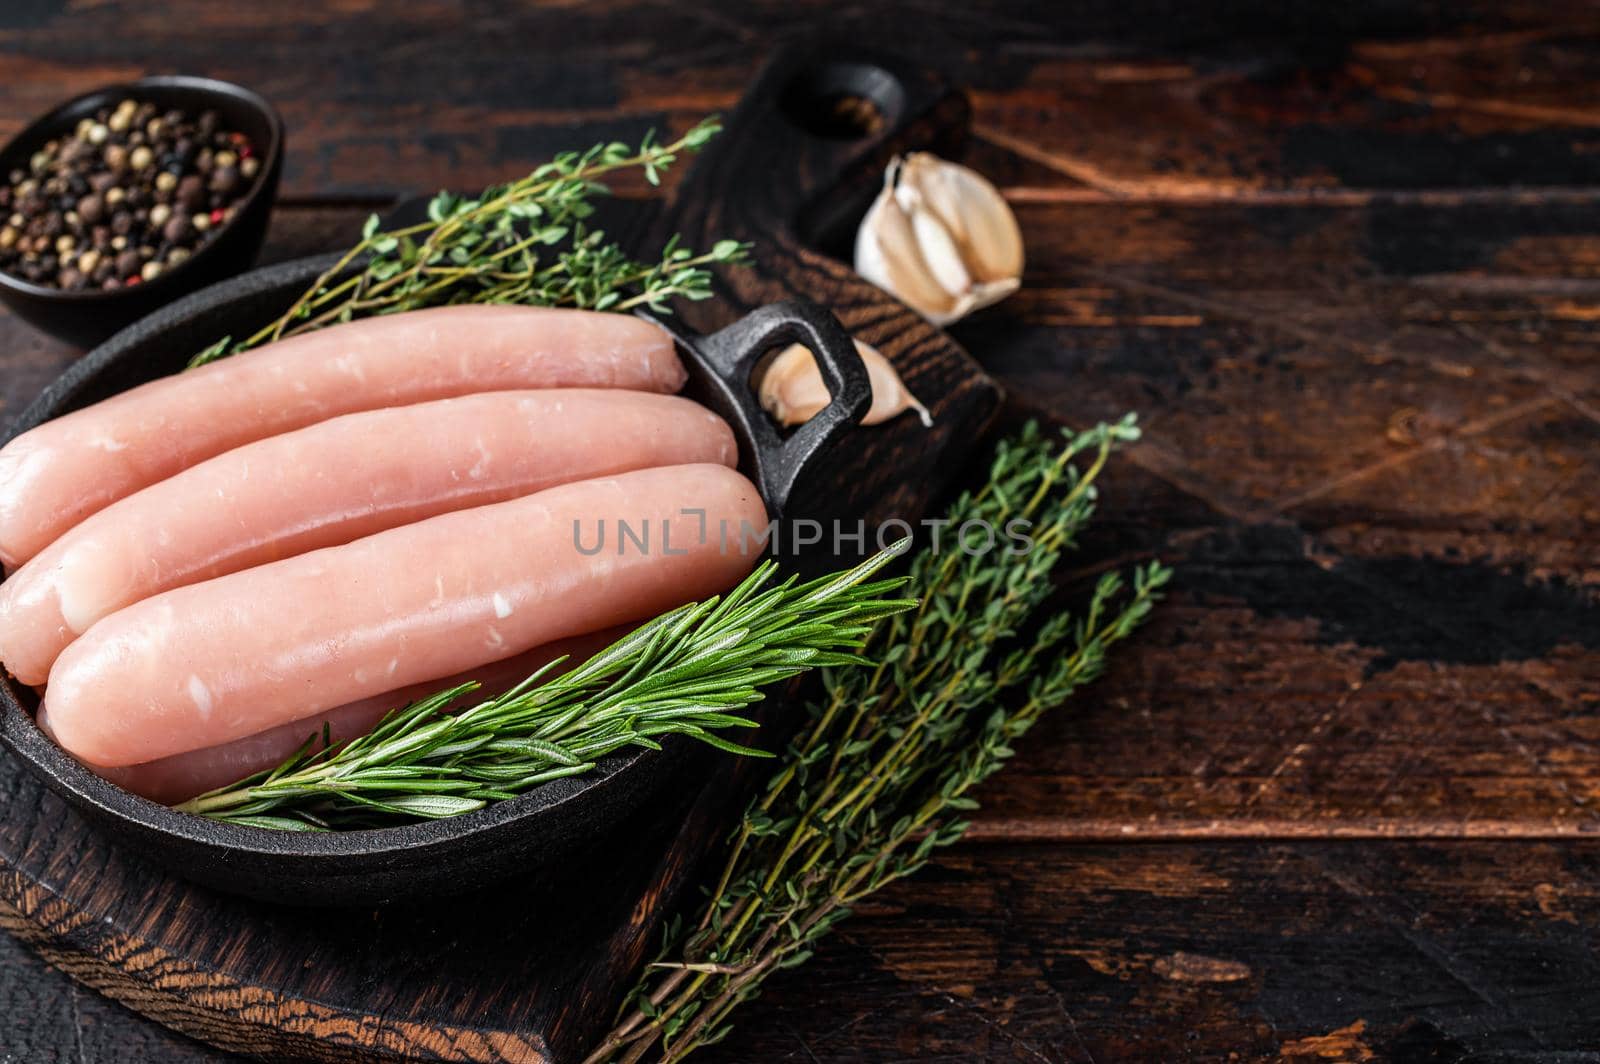 Pork raw sausages in a pan with herbs. Dark wooden background. Top view. Copy space.